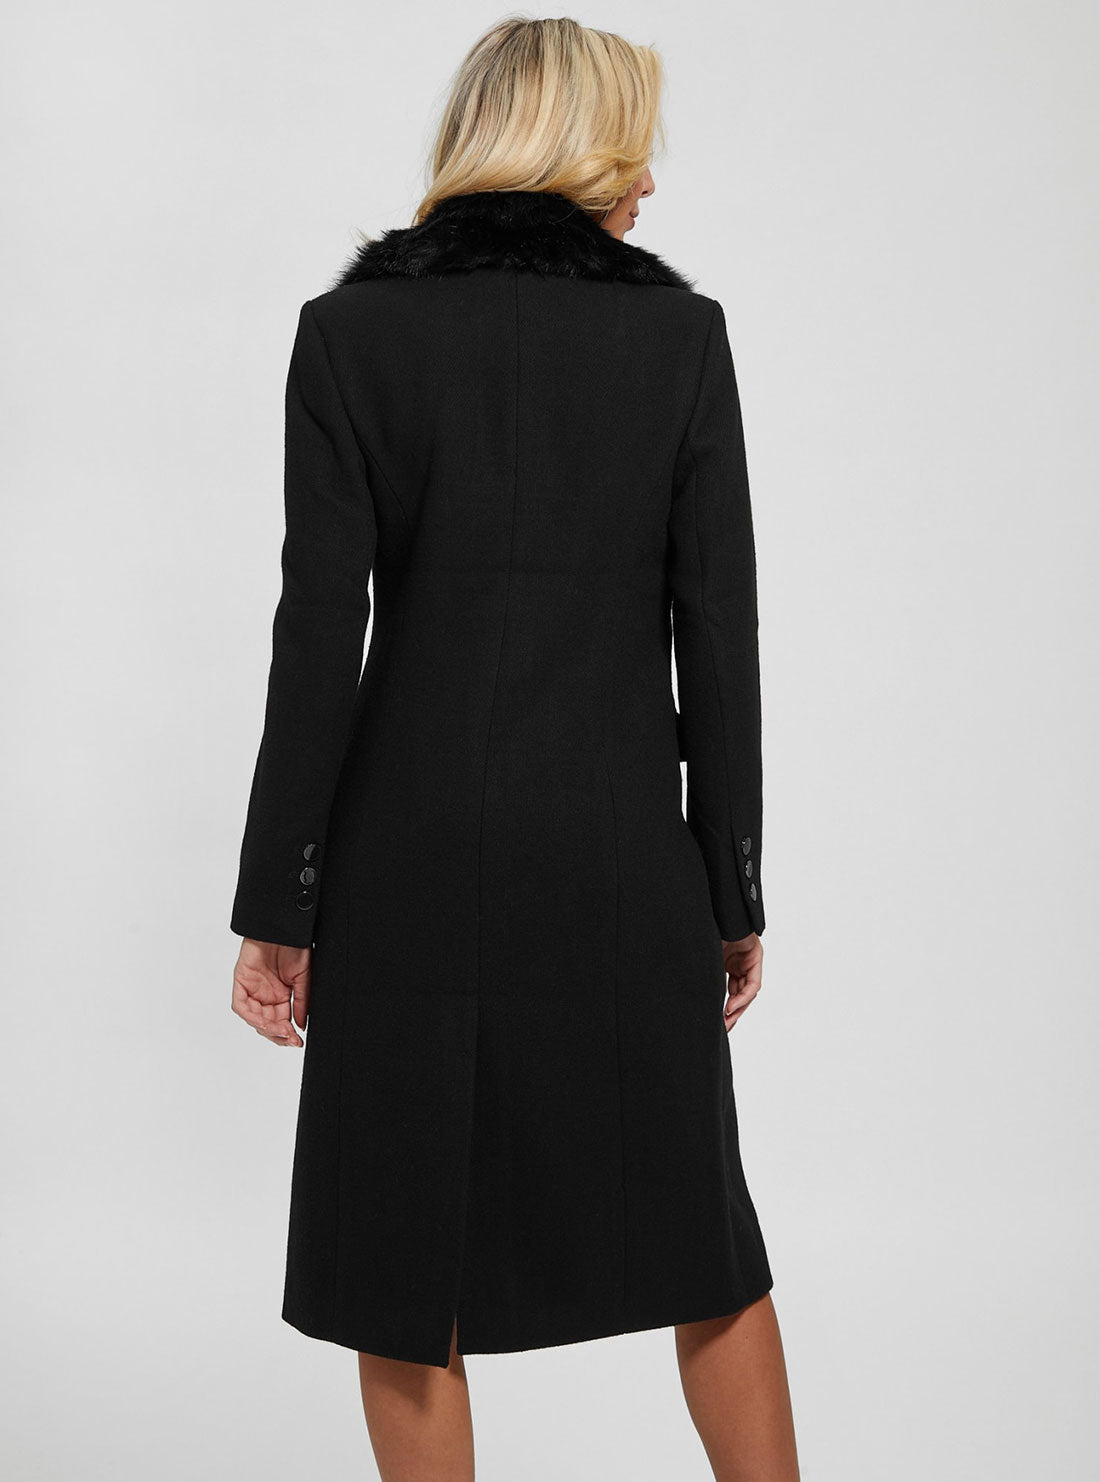 GUESS Women's Black Laurence Coat W2BL53WEWY0 Back View